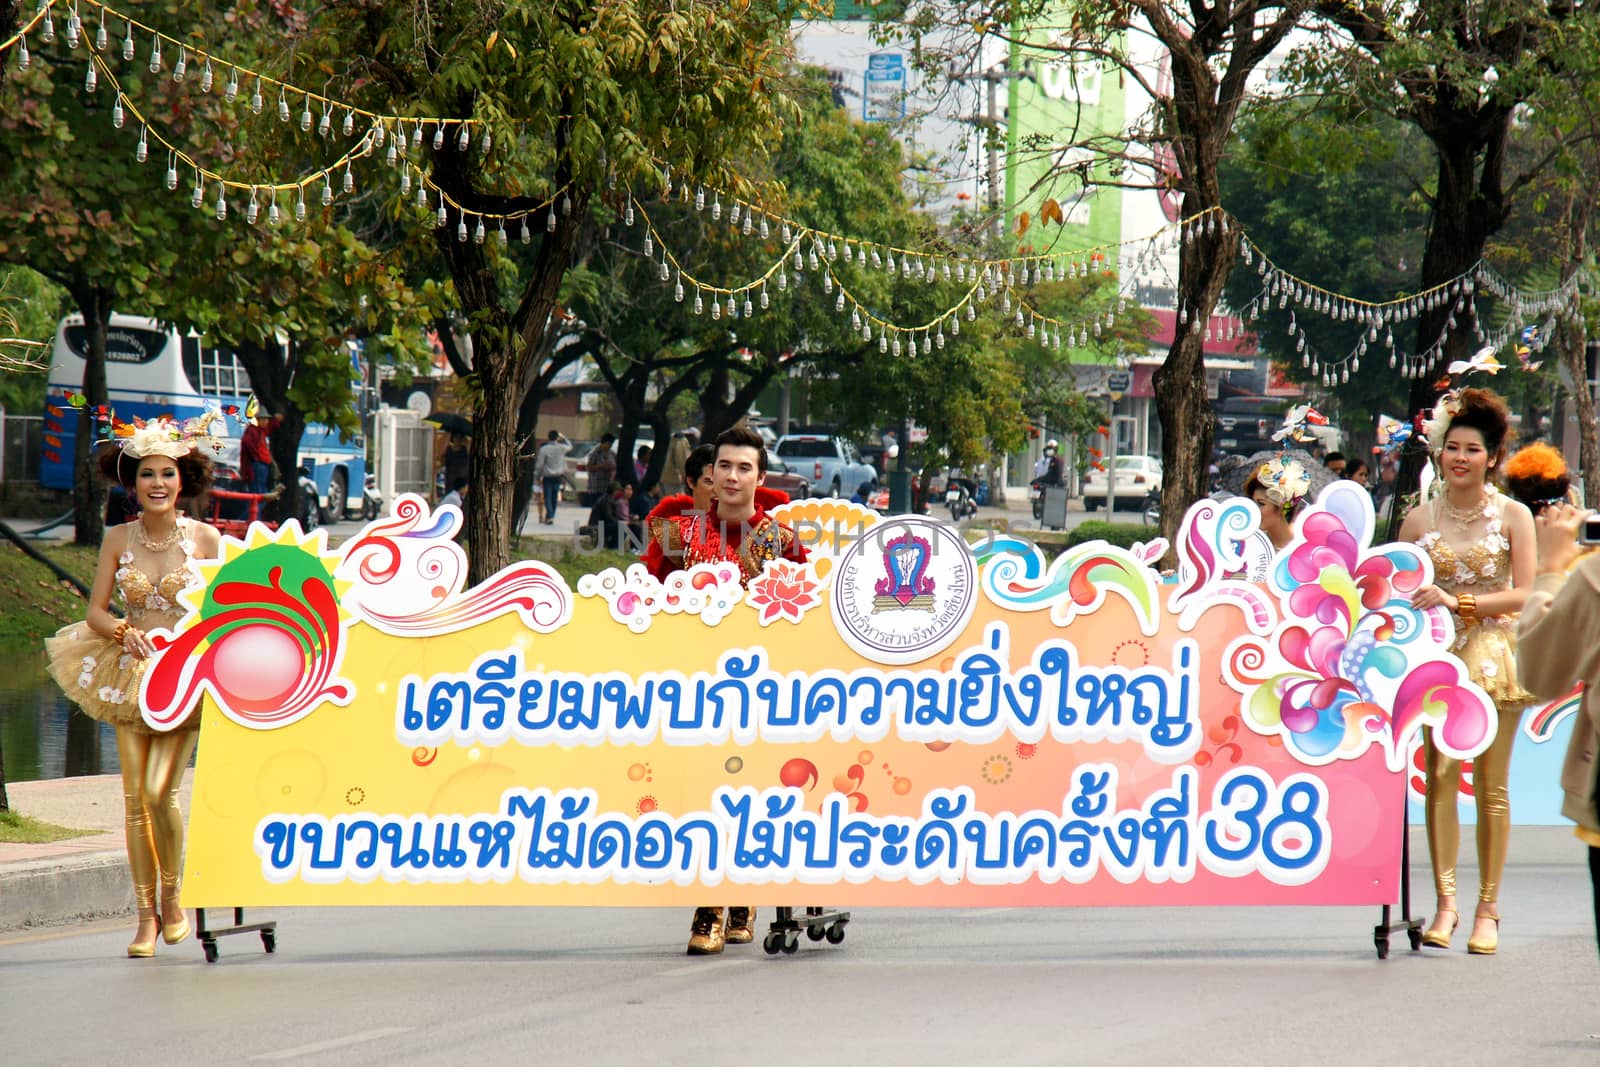 Thai people on the parade in Chiangmai Flower Festival 2013 by mranucha